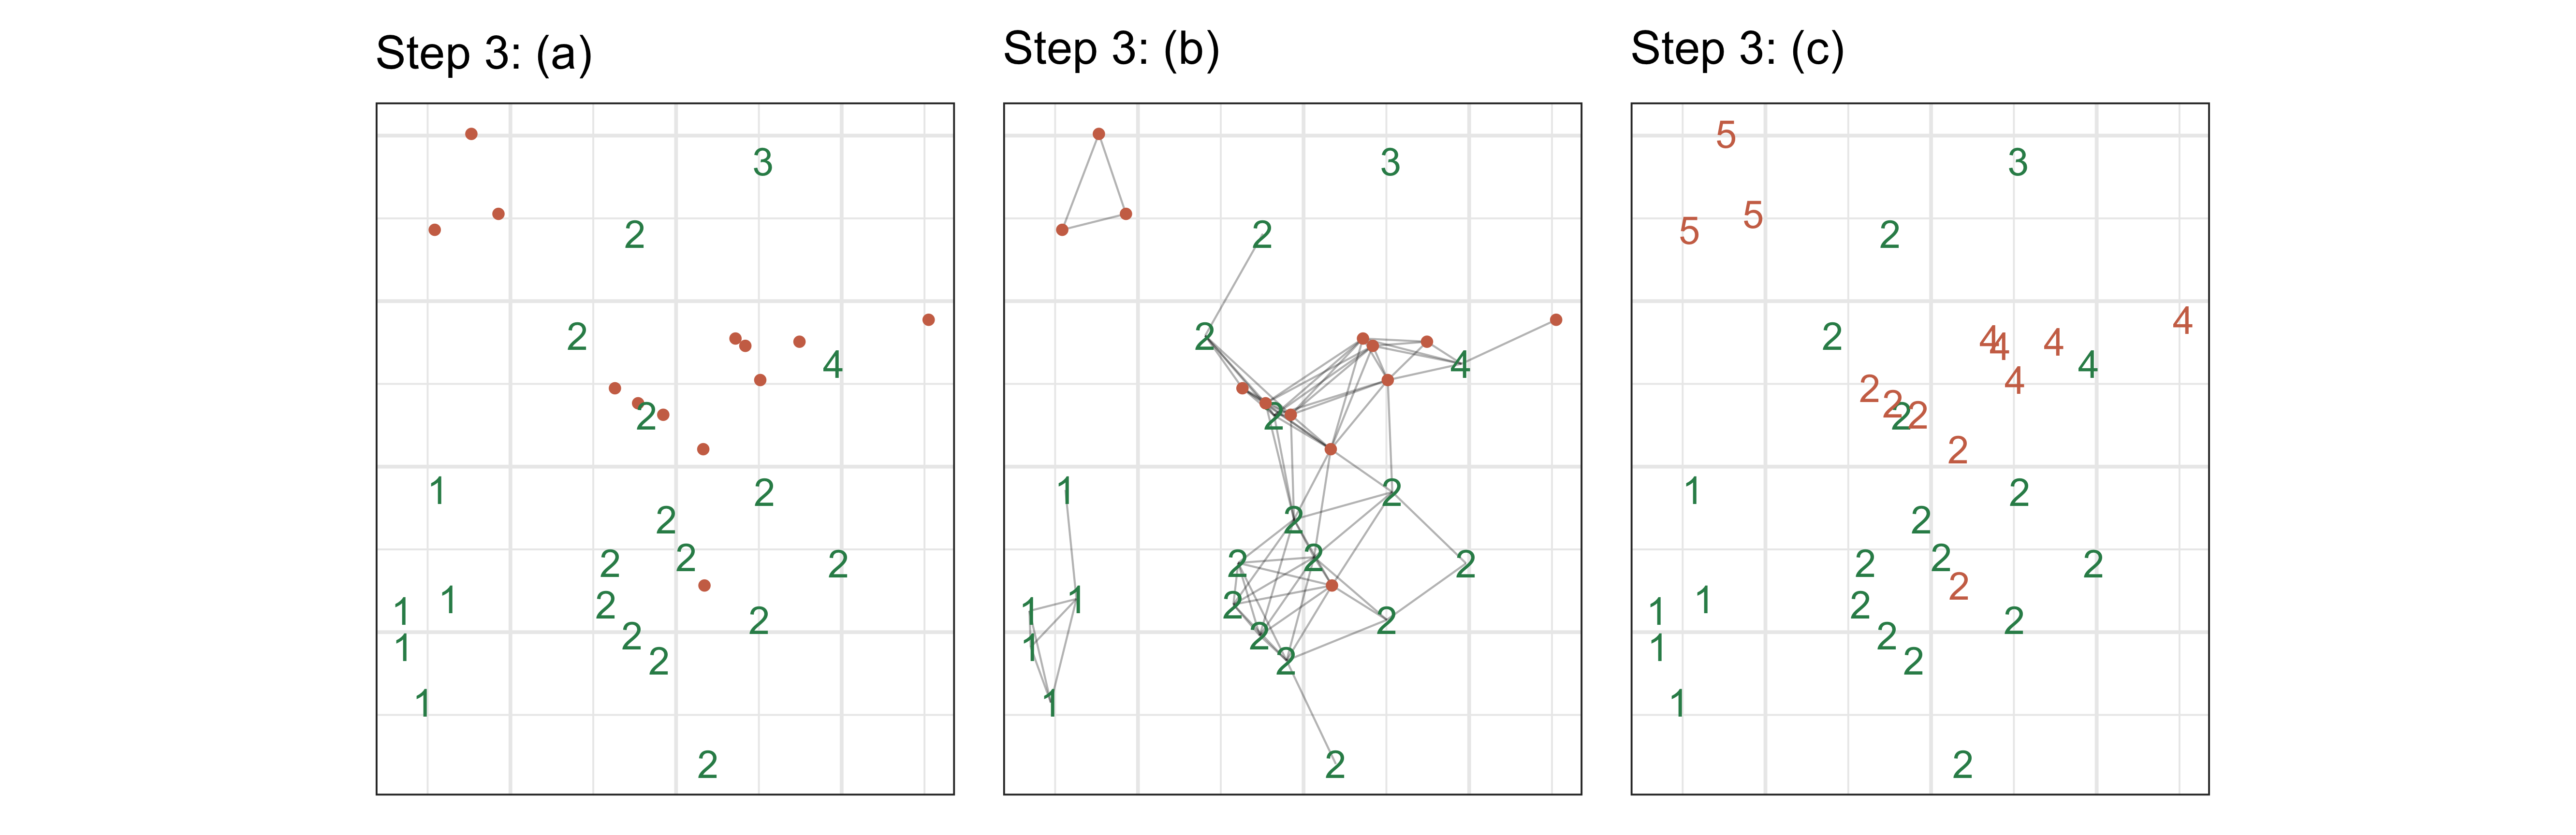 Illustration of clustering Step 3, which involves combining results from one time window to the next. There are 33 hotspots at $\boldsymbol{S}_t$, where 20 (green) of them have been previously clustered at $\boldsymbol{S}_{t-1}$ (Figure 1 f) and 13 (orange) of them are new hotspots. The connected graph show the clustering in this time window. Hotspots previously clustered at $\boldsymbol{S}_{t-1}$ keep their cluster labels. The 13 new hotspots are assigned labels of the nearest hotspot's cluster label. This might mean that a big cluster $\boldsymbol{S}_t$ (indicated by the graph) would be split back into two, if it corresponded to two clusters at $\boldsymbol{S}_{t-1}$ (e.g. clusters 2, 4). New clusters of hotspots are assigned a new label (e.g. cluster 5).